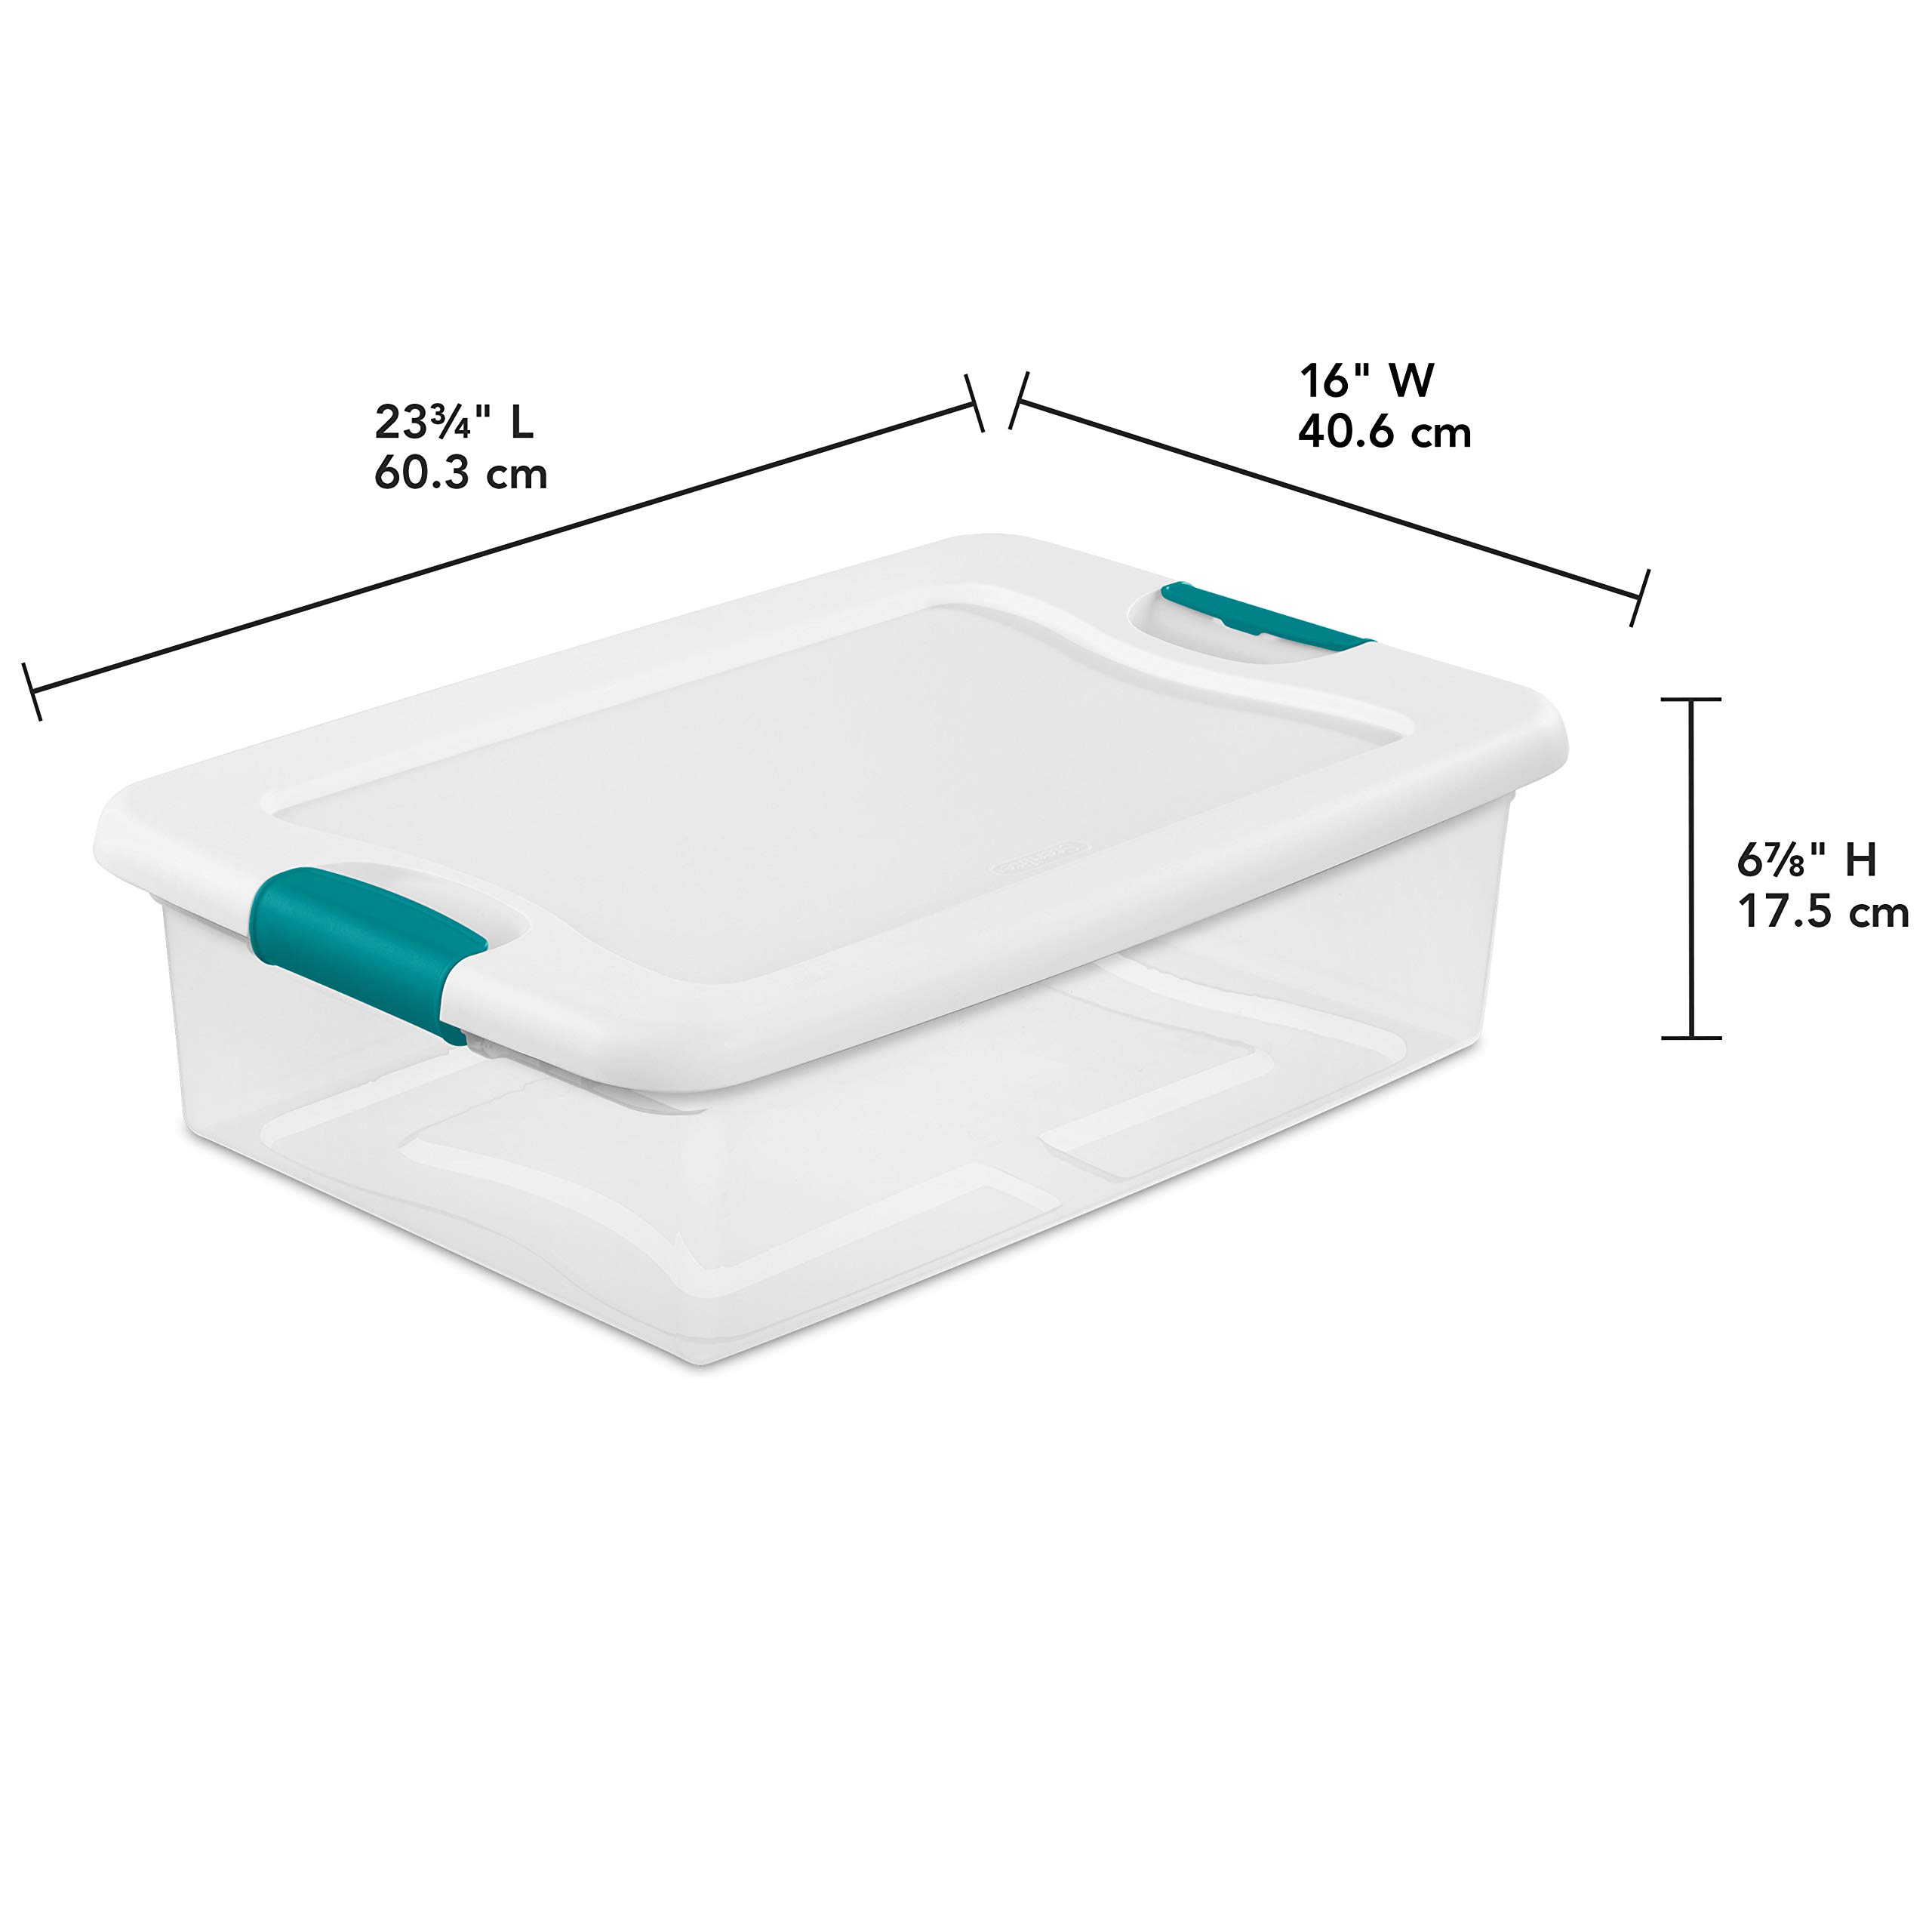 Sterilite 14968006 32 quart/30 L Latching Box with Clear Base, White Lid and Colored Latches, 6-Pack